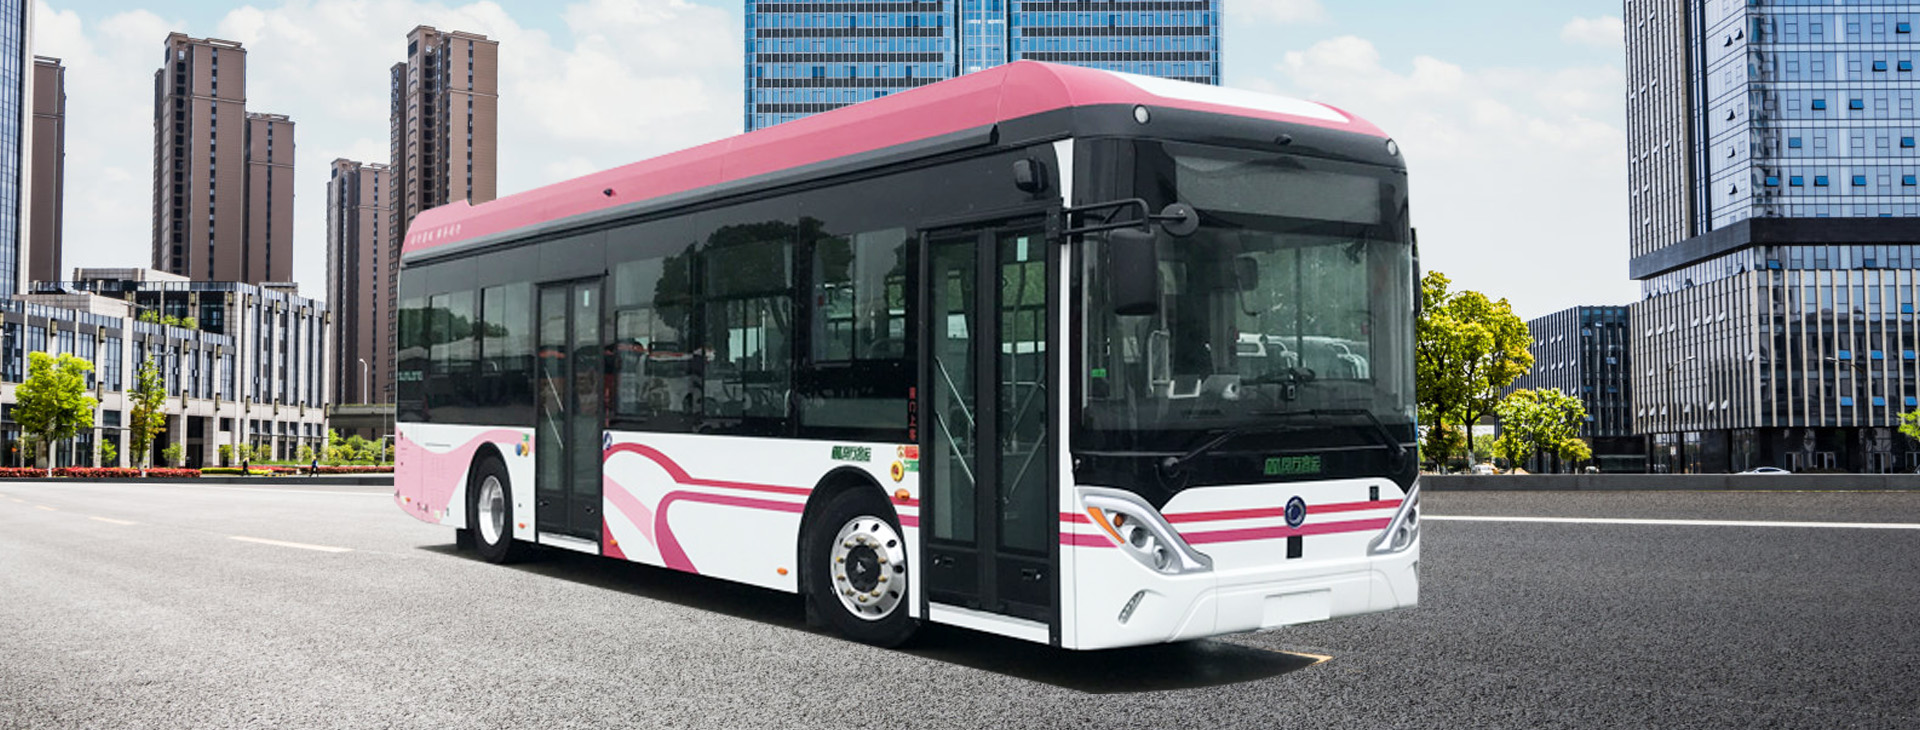 SLK6111 pure electric road bus